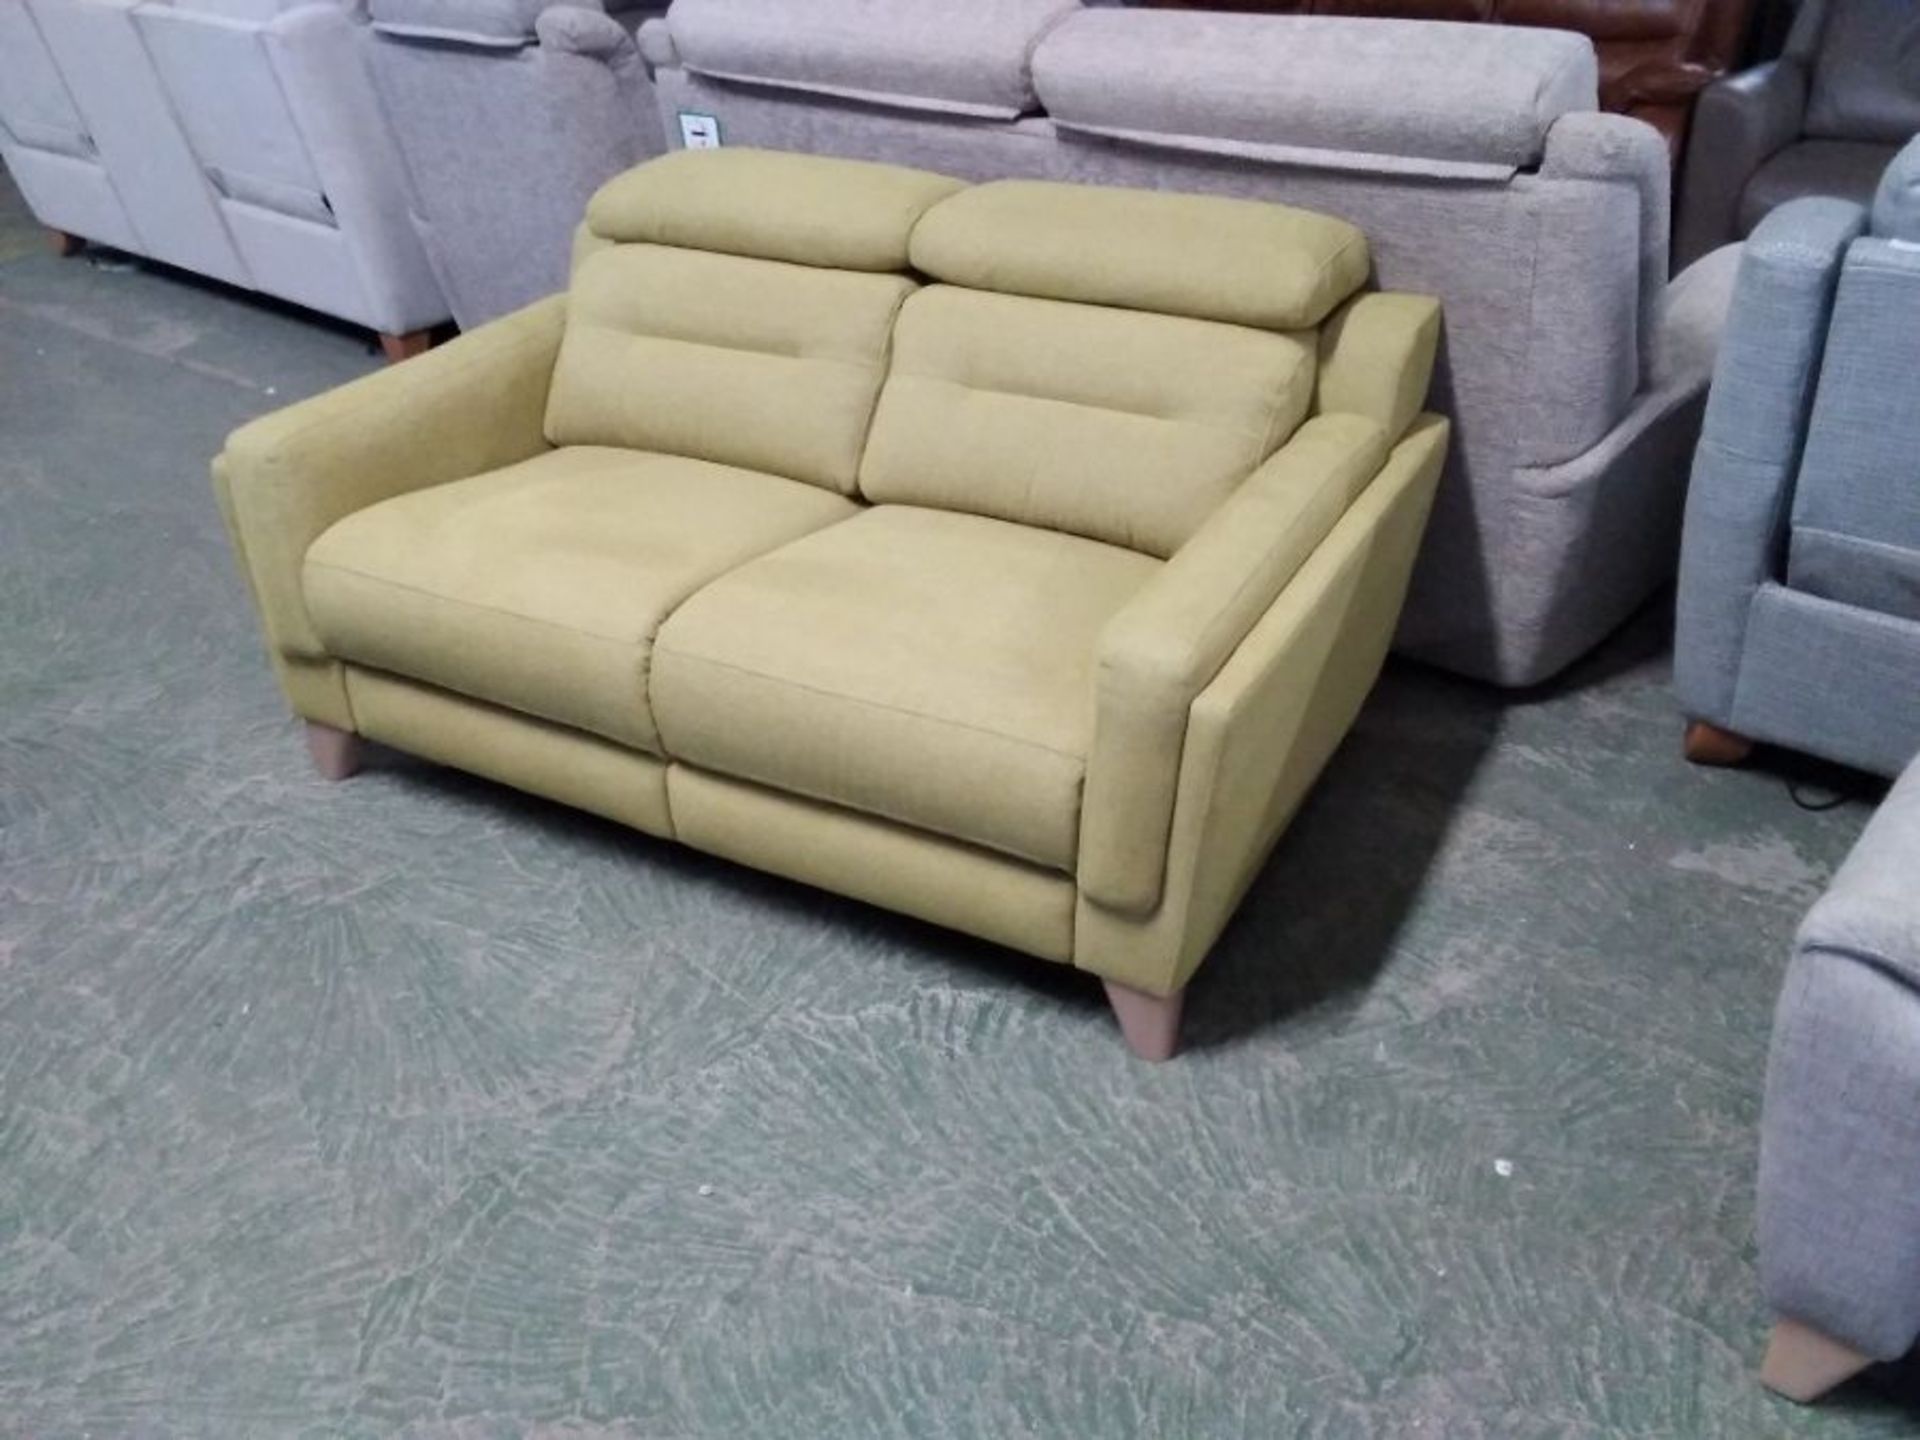 LIME GREEN 2 SEATER SOFA WITH ADJUSTABLE HEADREST(